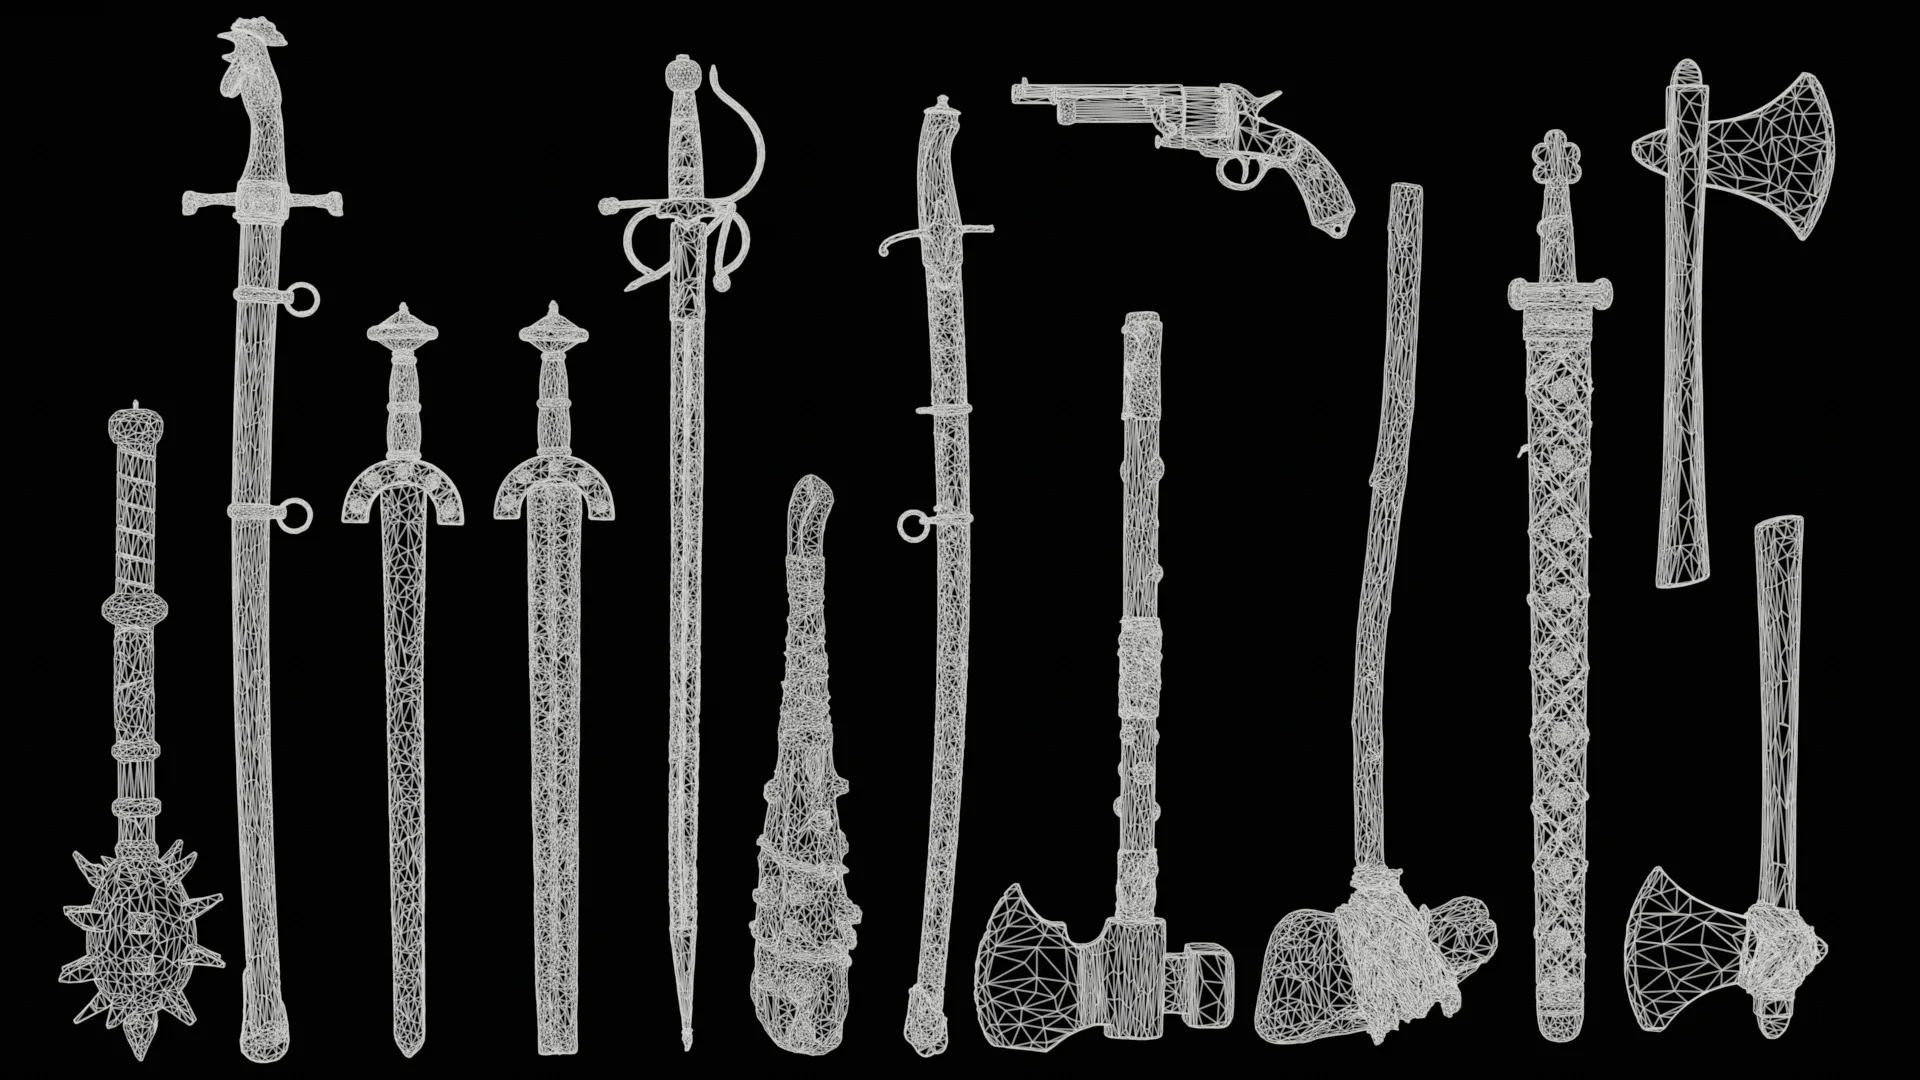 13 Apocalytpic Ornamental Weapons